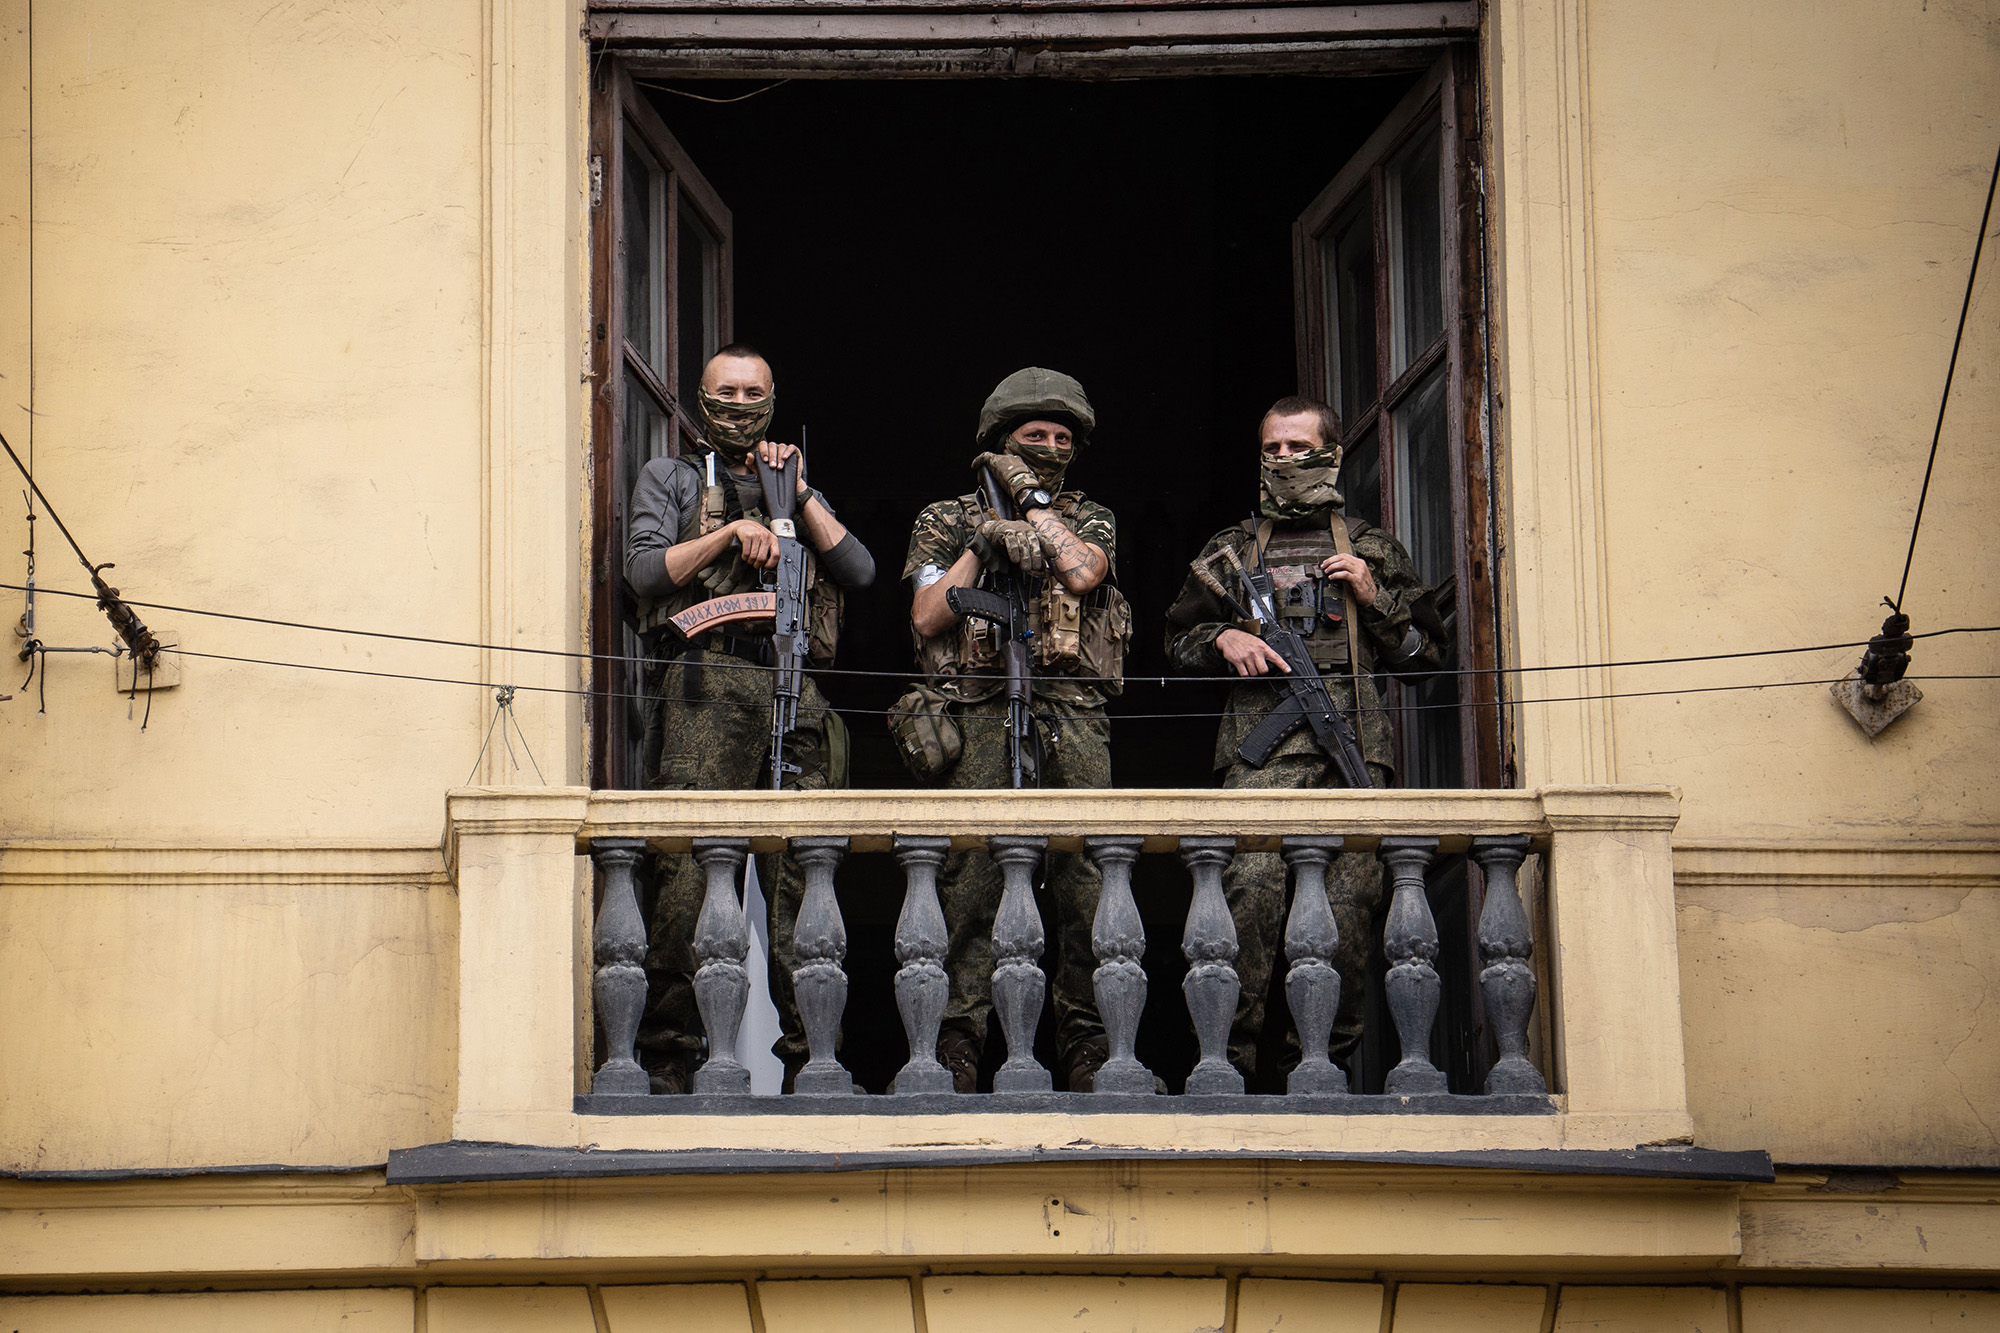 Members of Wagner group stand on the balcony of a building in the city of Rostov-on-Don, Russia, on June 24.